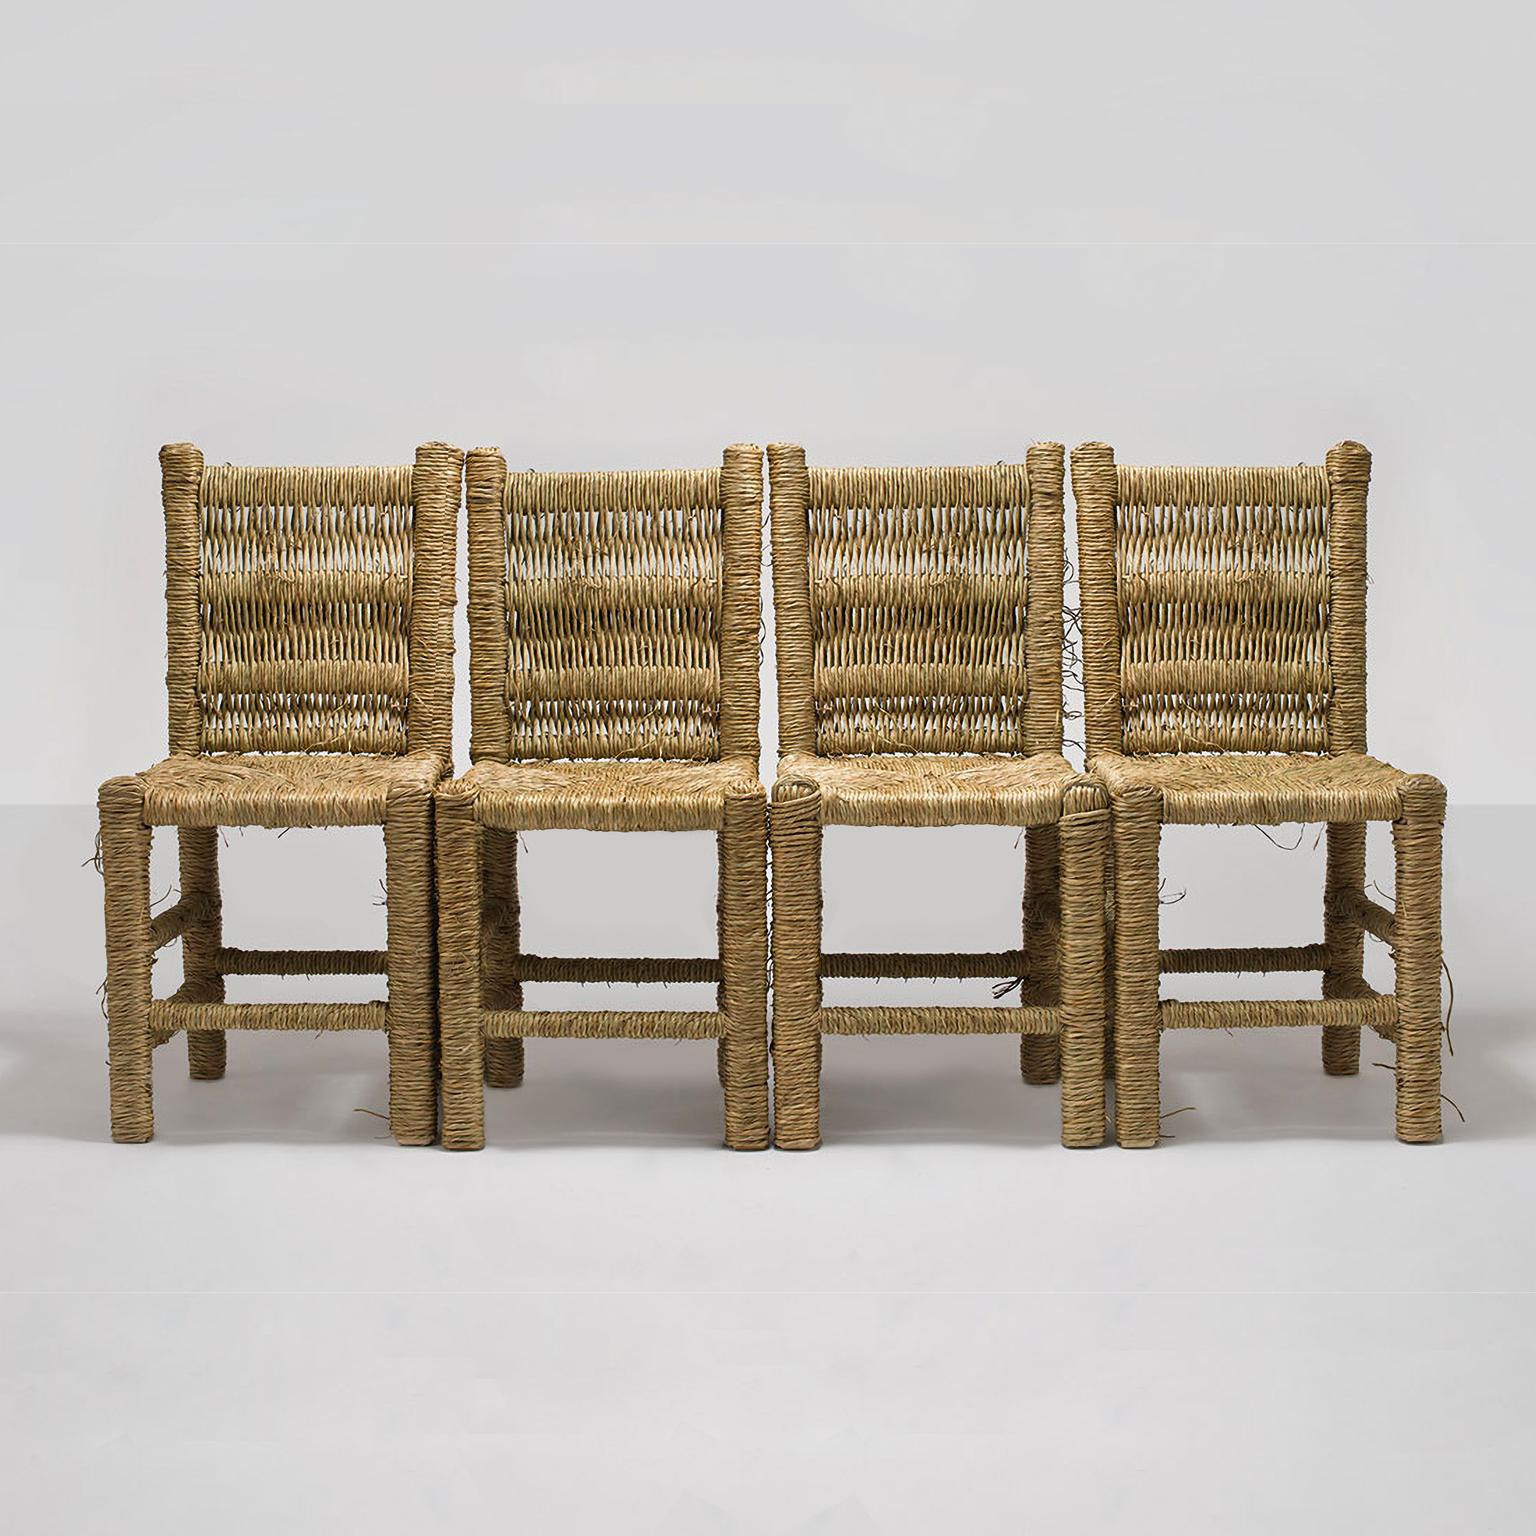 Italian 21st Century Vincent IV Set of 4 Chairs by Atelier Biagetti Caned Natural Wood